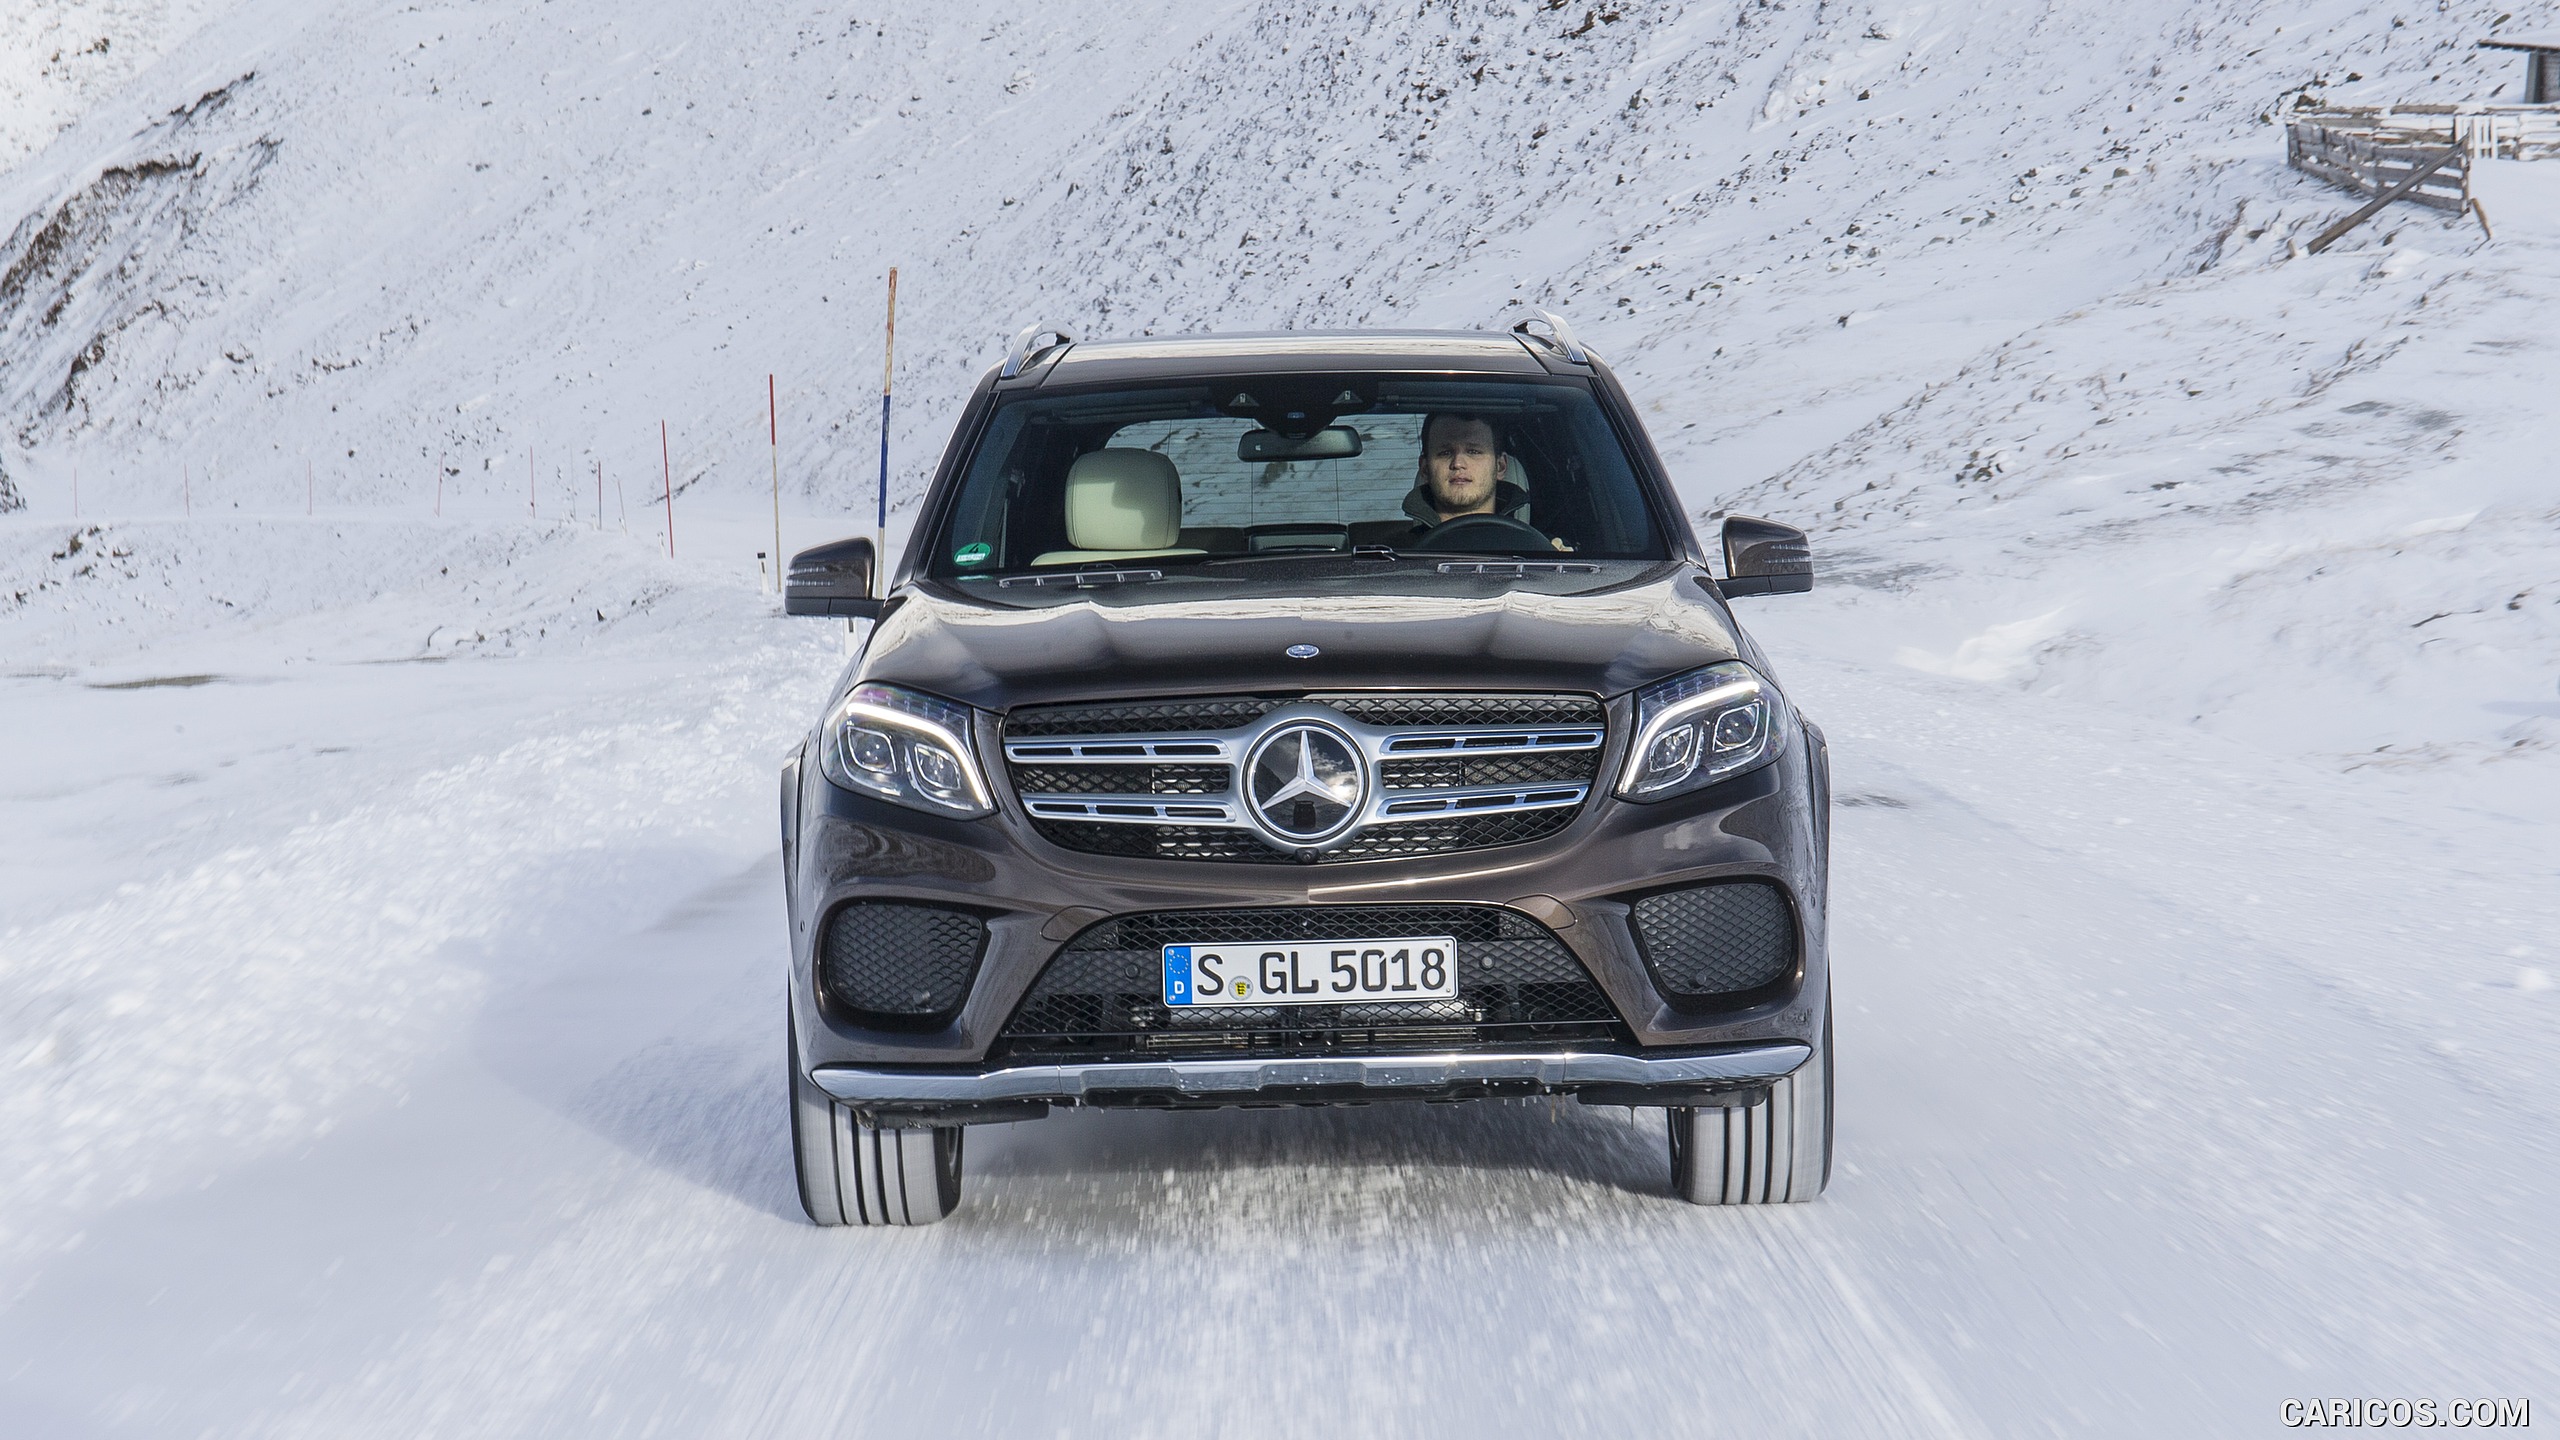 2017 Mercedes-Benz GLS 350d 4MATIC AMG Line in Snow - Front, #180 of 255